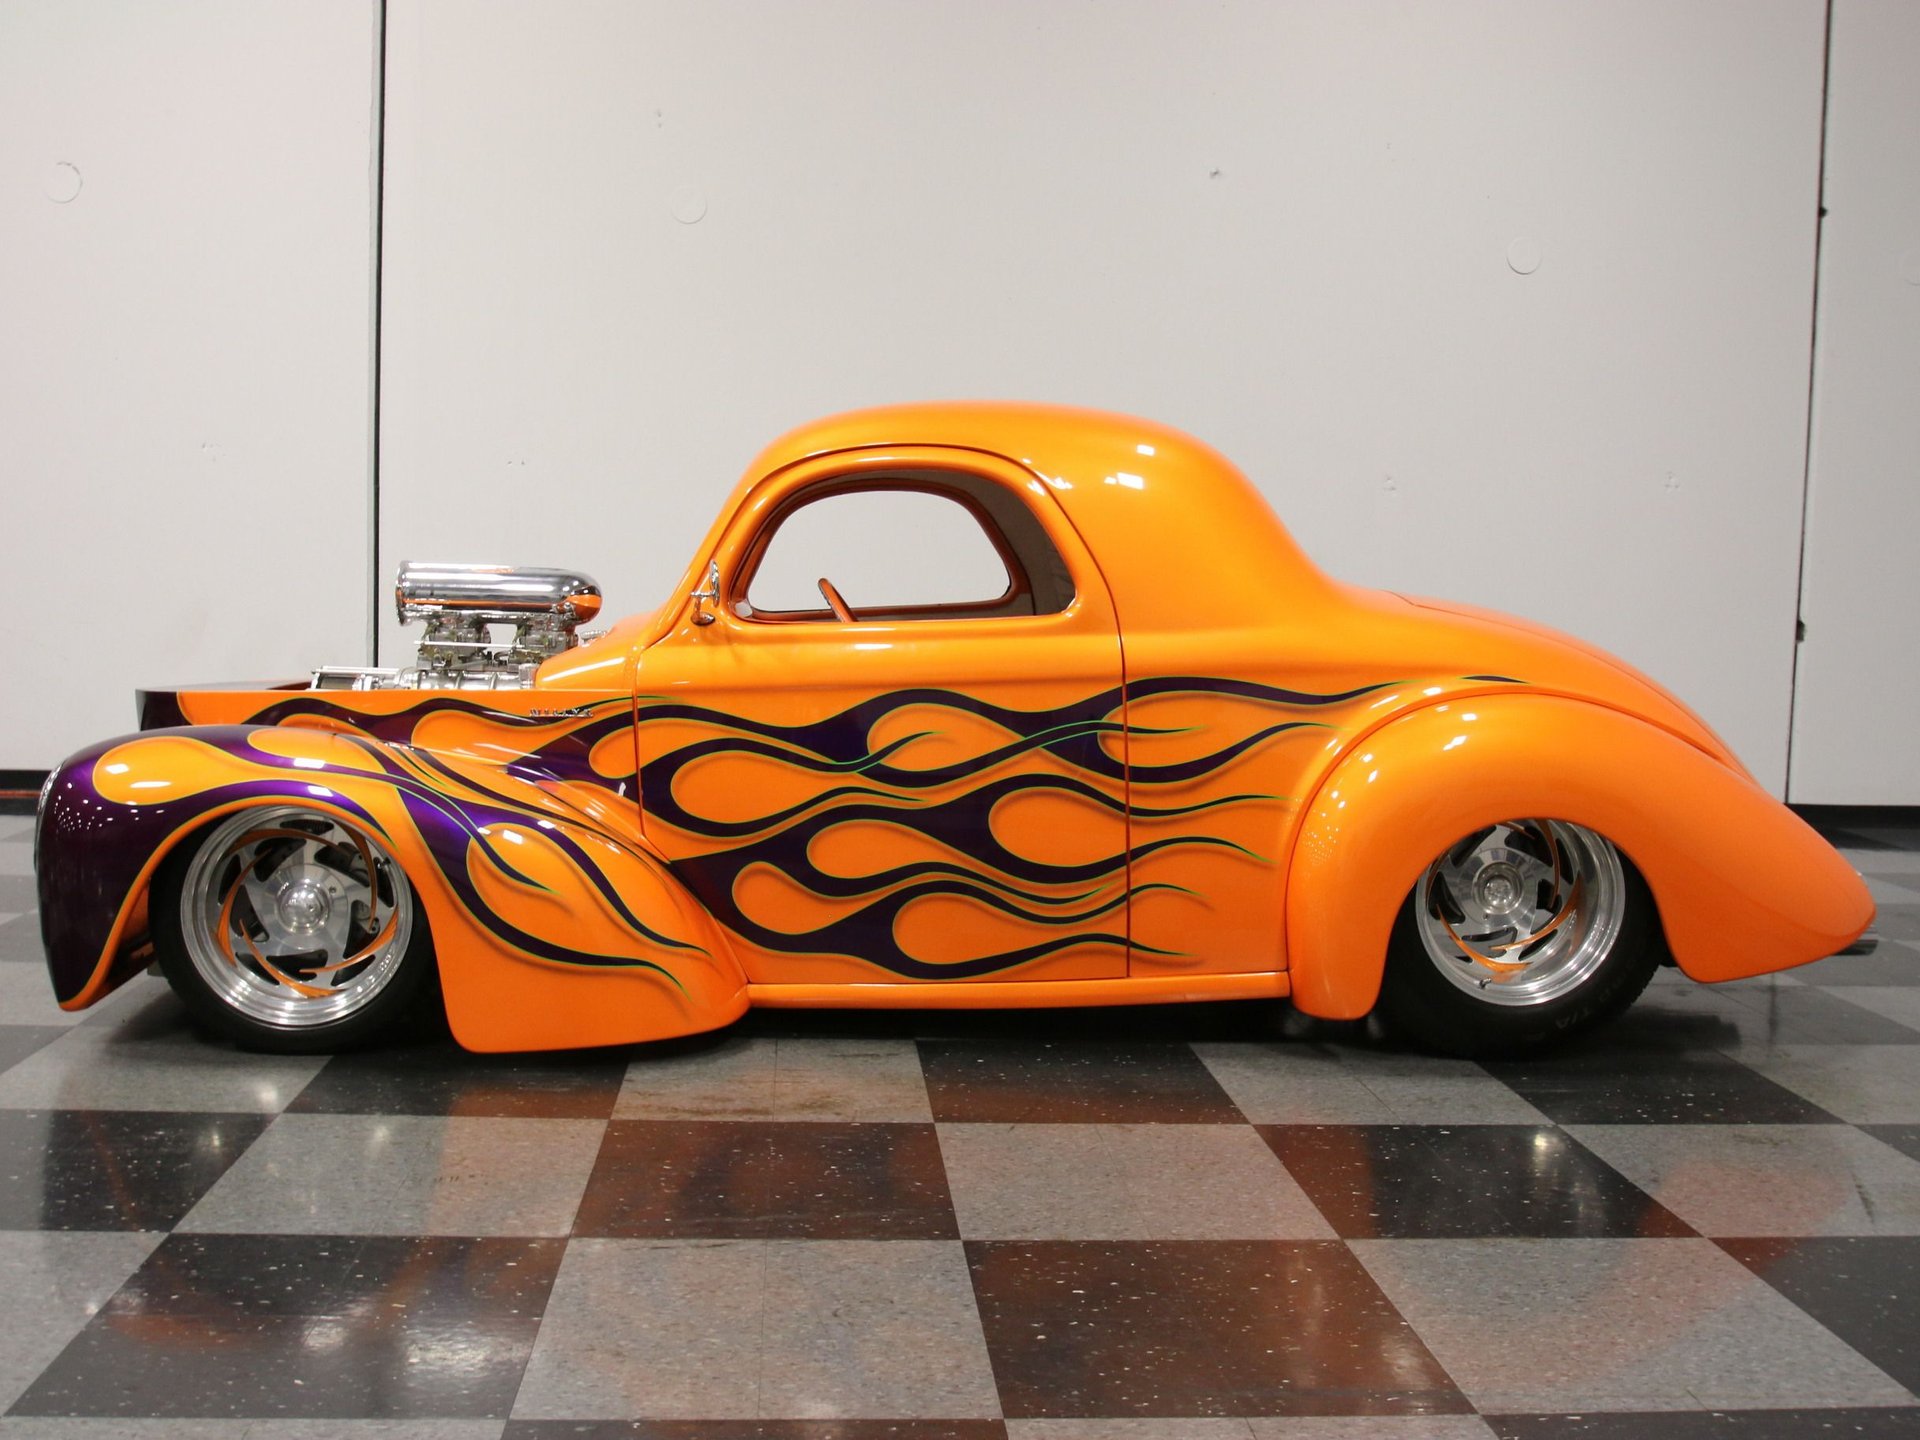 1941 willys coupe